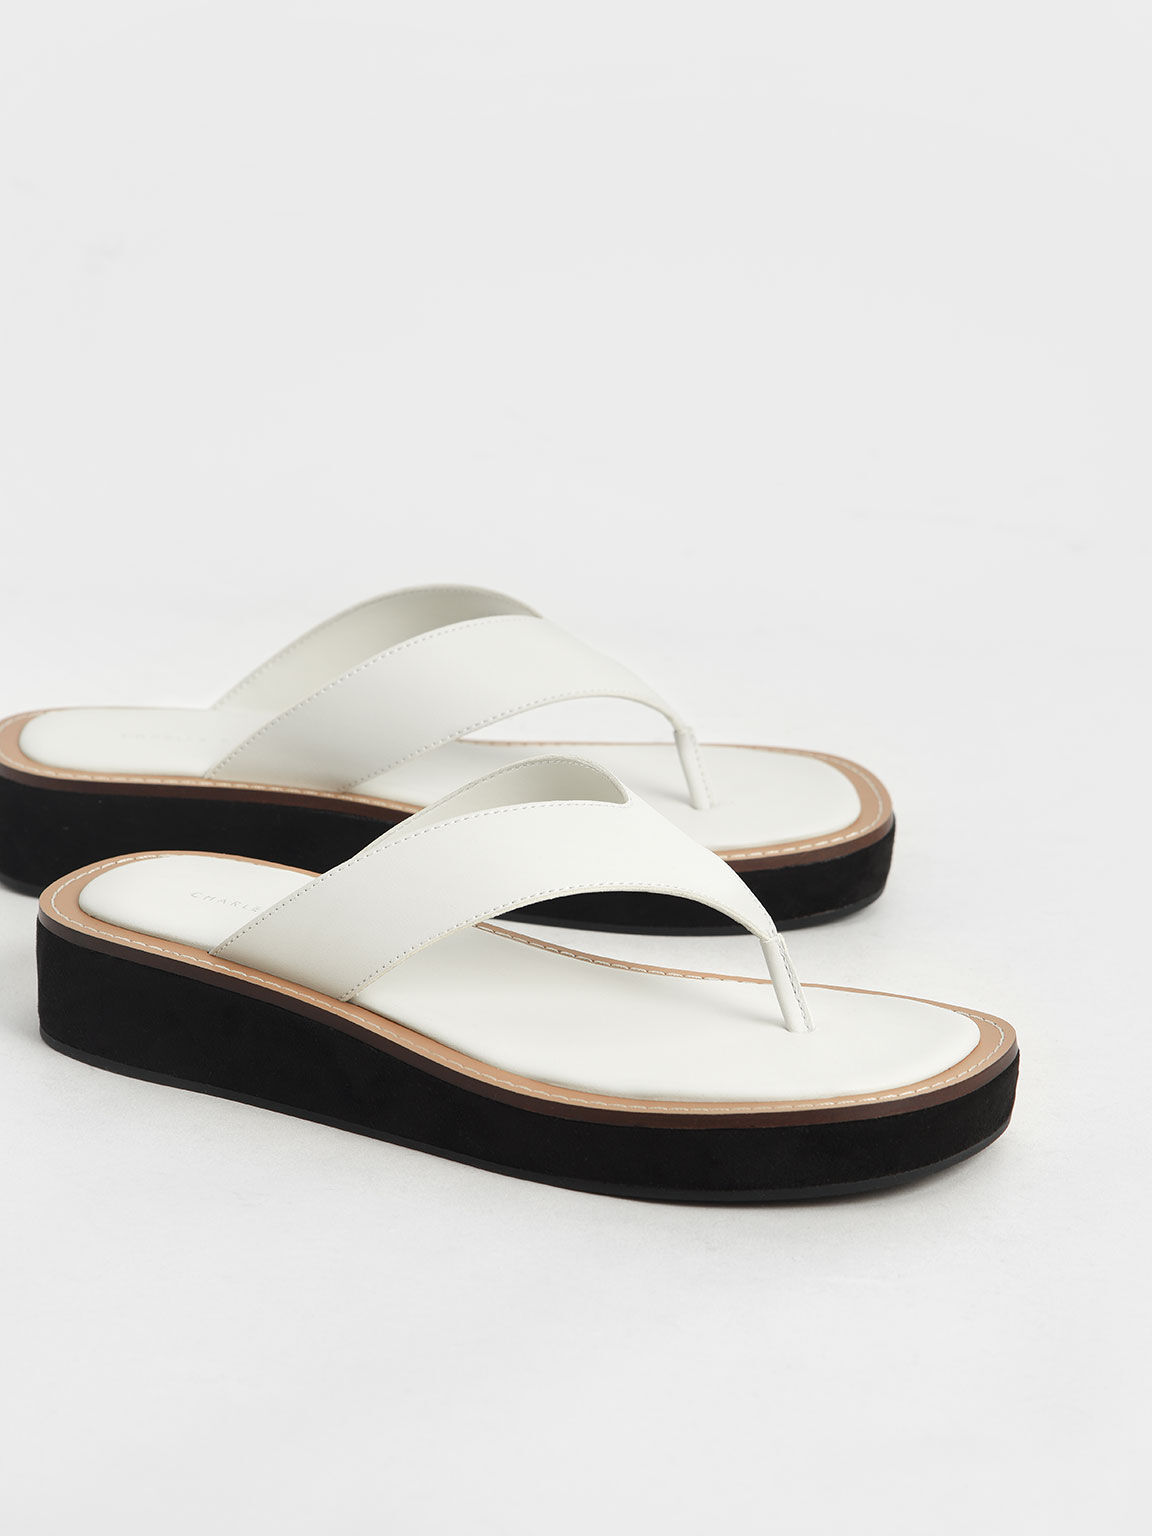 Shop Women's Shoes Online | CHARLES & KEITH MY